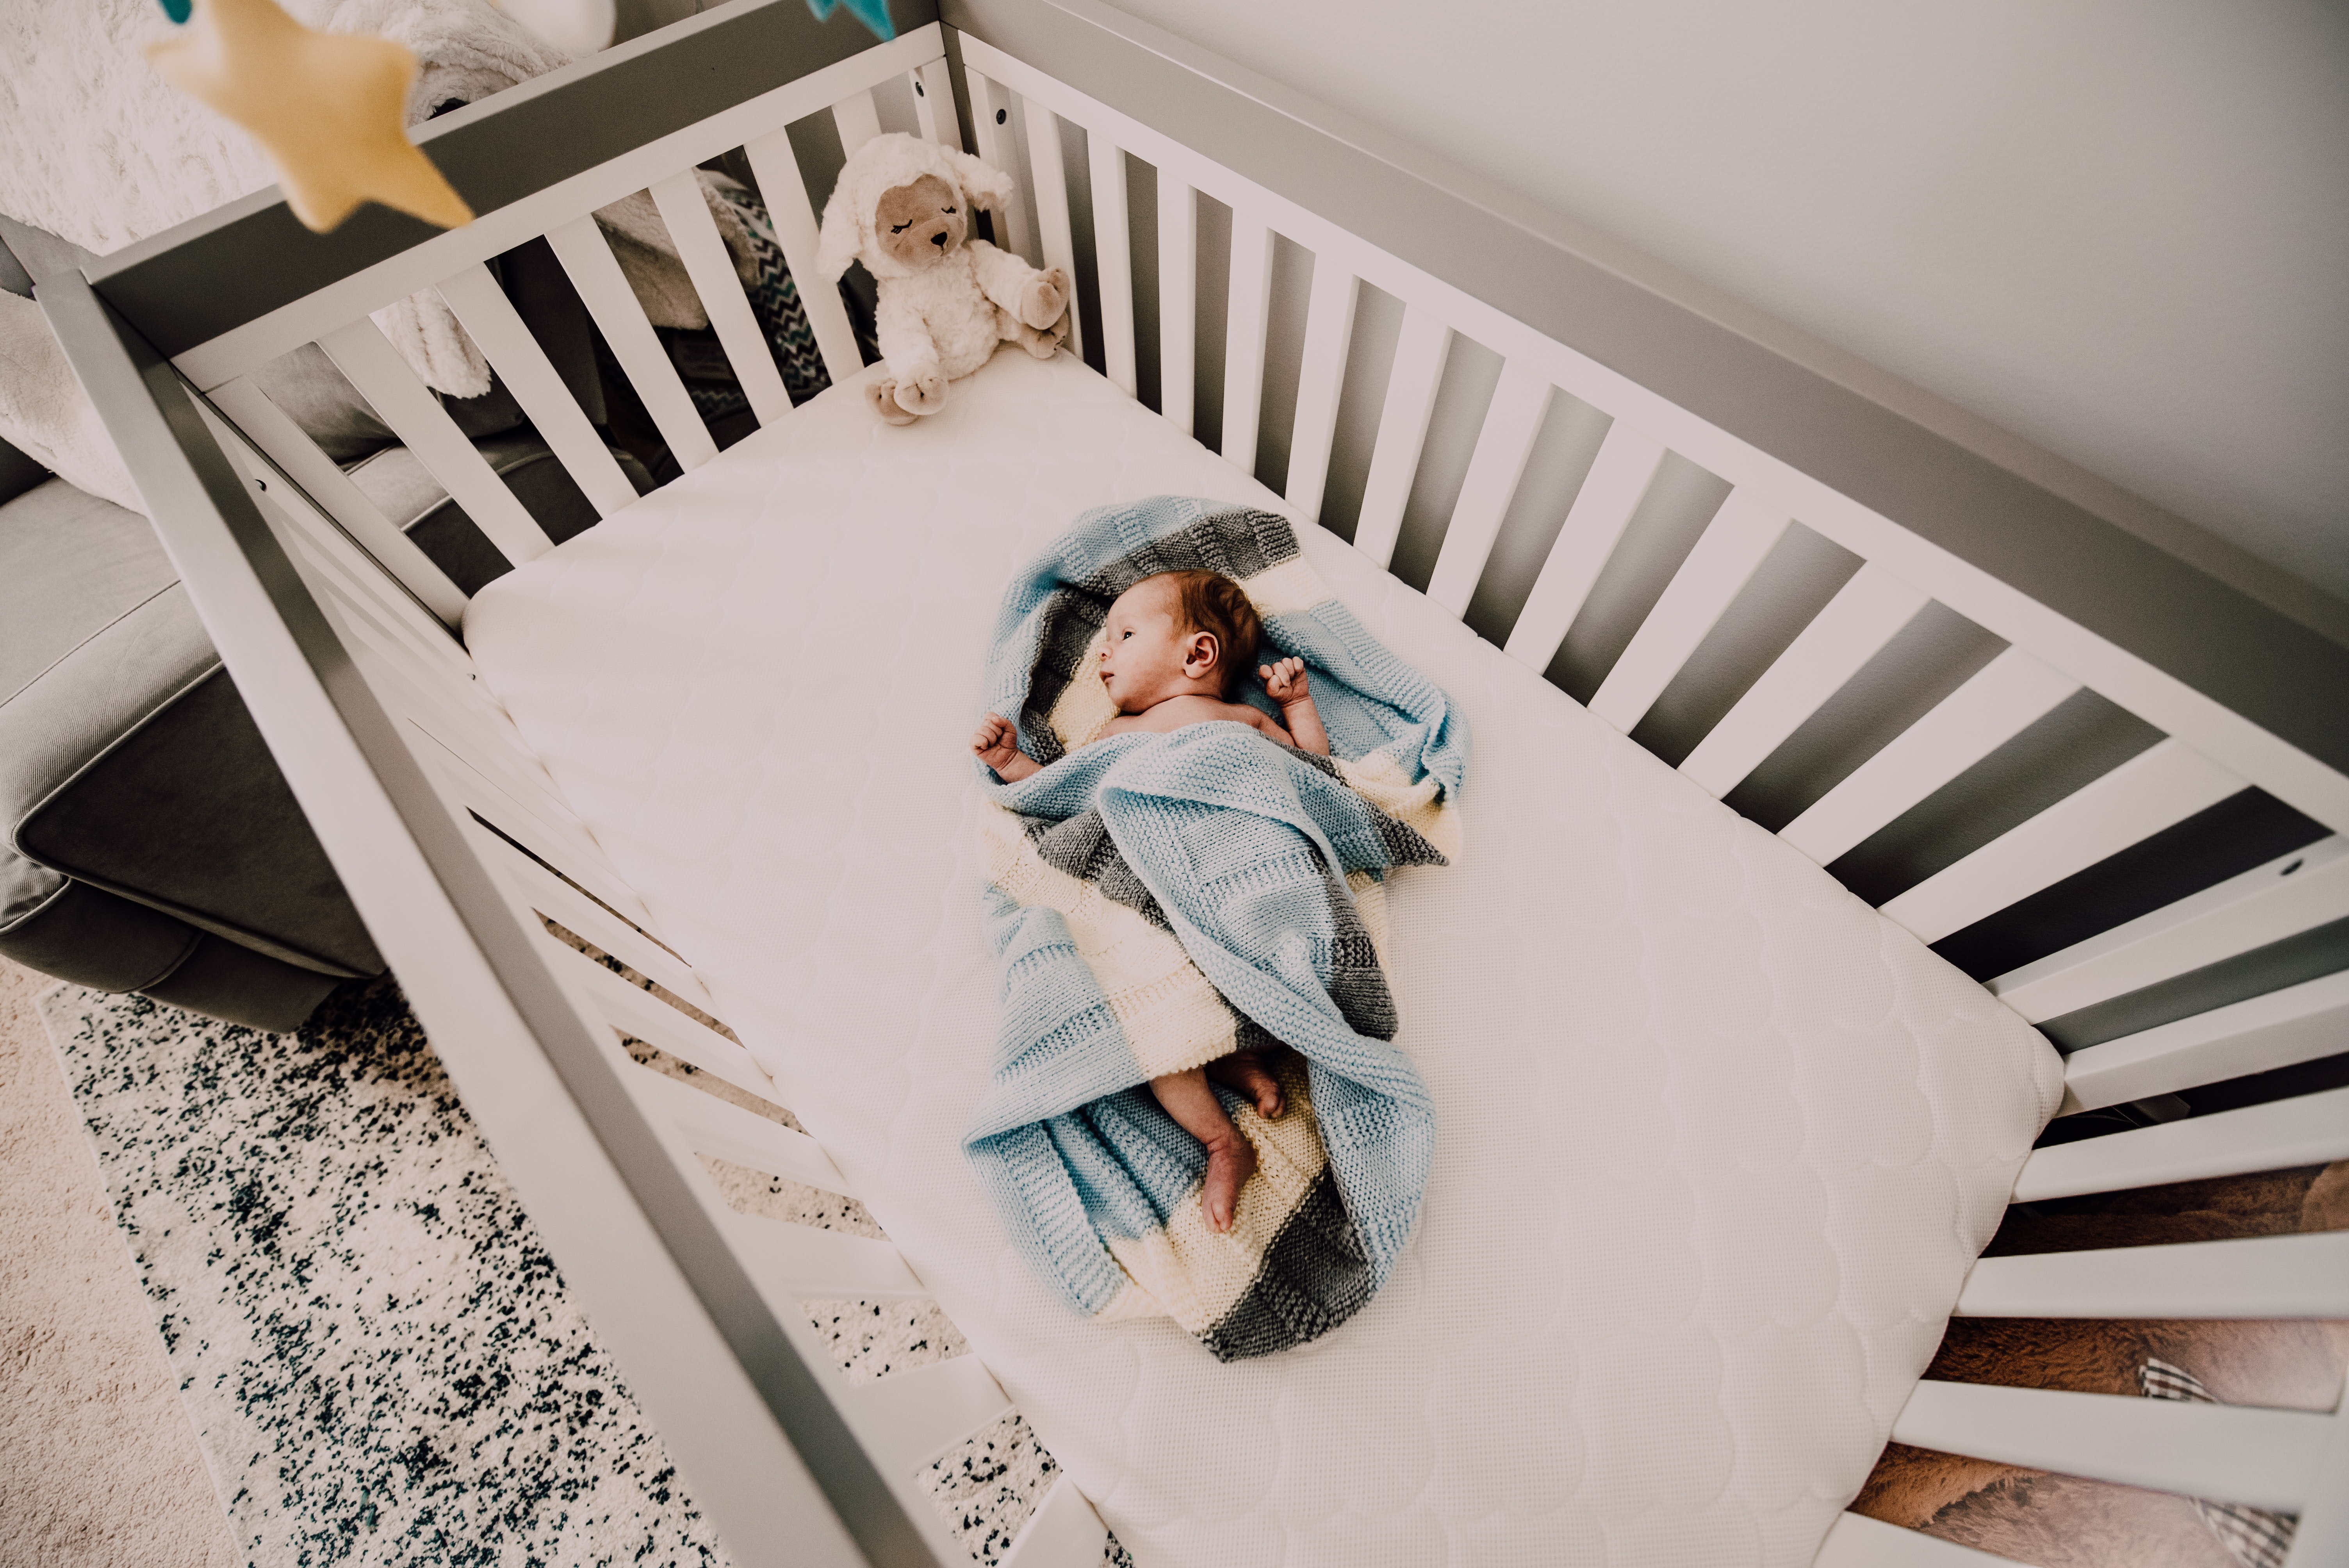 An in-depth review of the best convertible cribs available in 2019.